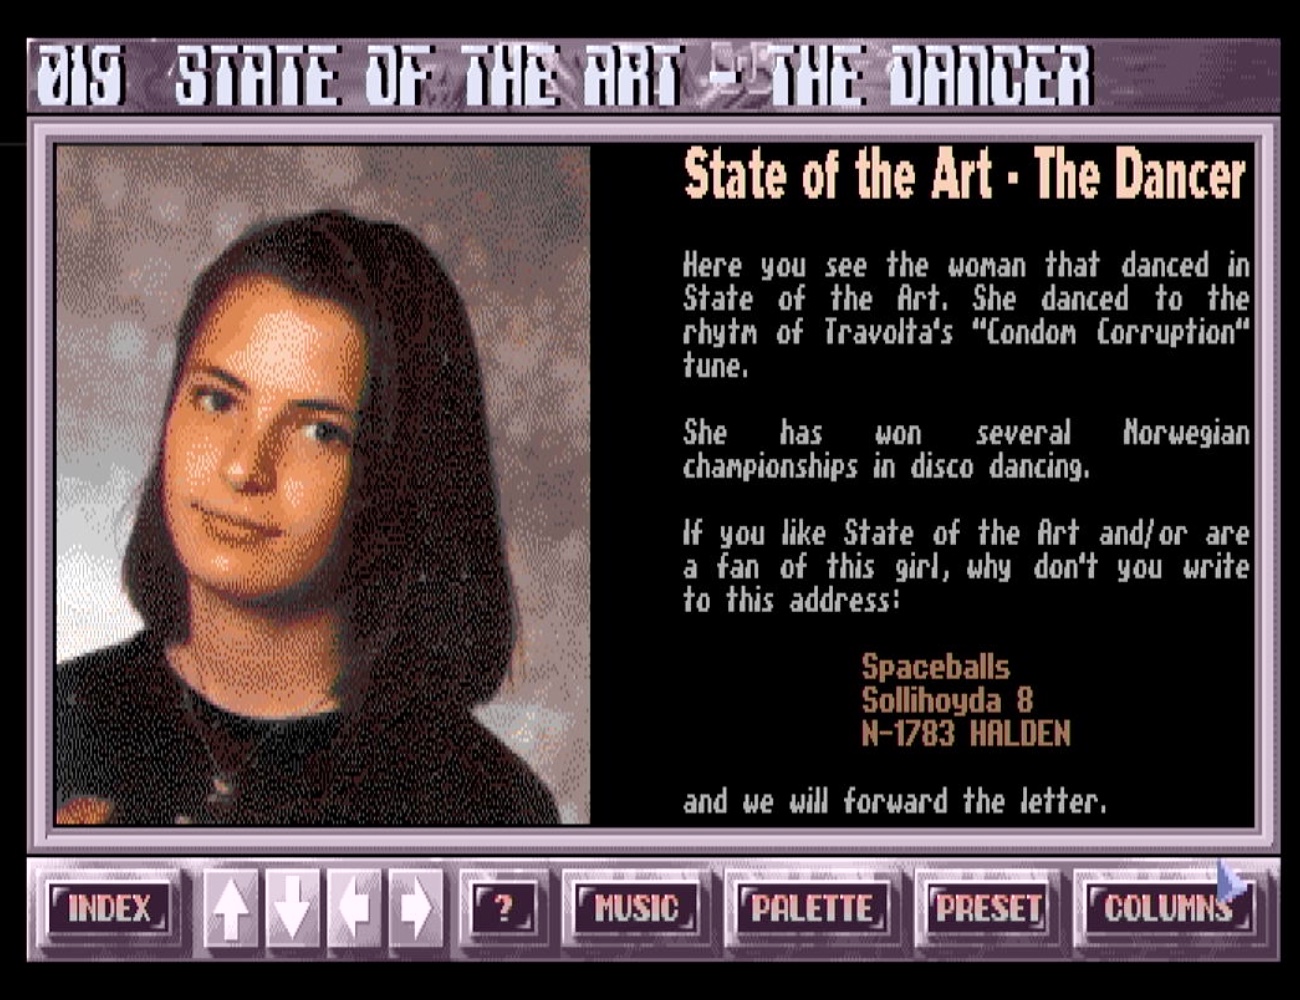 An introduction of the dancer whose footage was used in the demo, again a screenshot from the R.A.W. diskmag